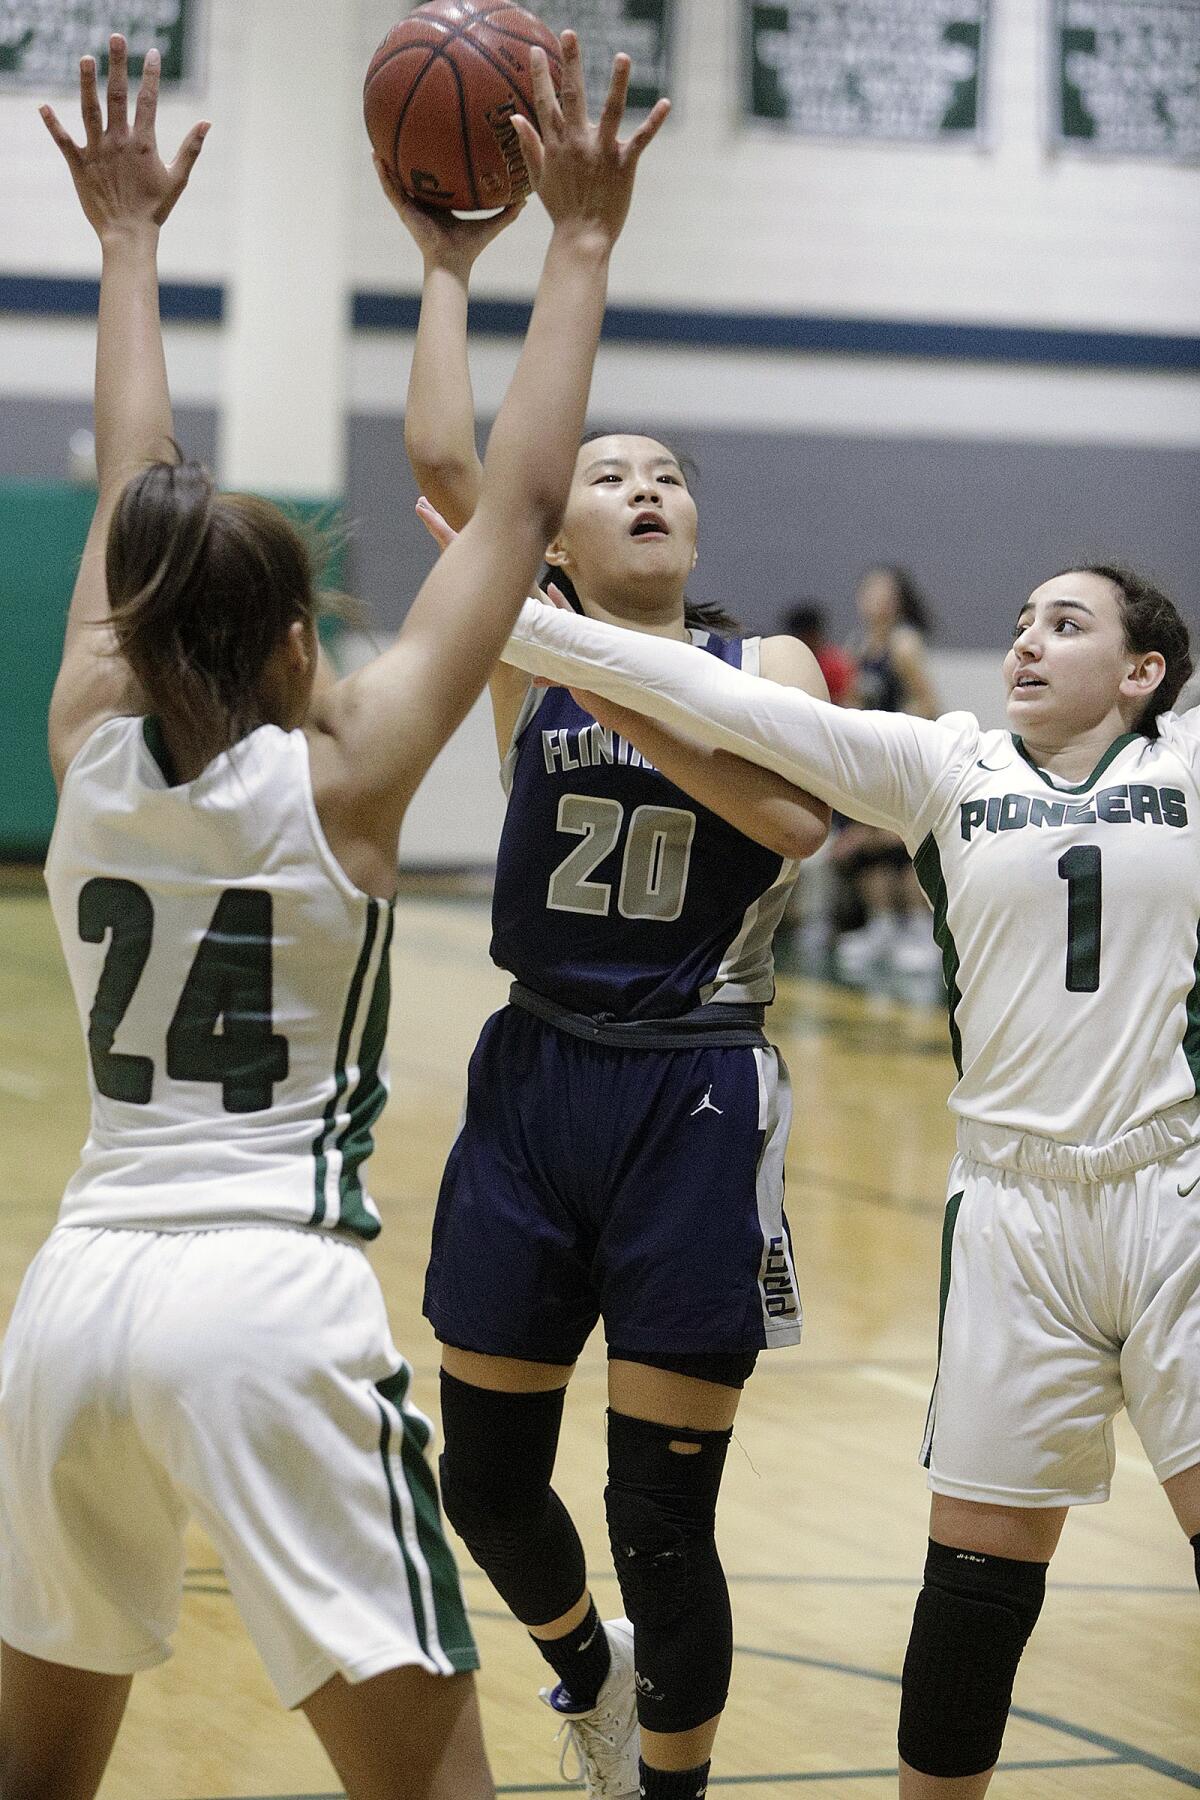 Flintridge Prep's Ashlyn Zhang drives into the lane and shoots against Providence's Sophie Nazarian and Ava Tibbs in a Prep League girls' basketball game at Providence High School on Friday, January 10, 2020.